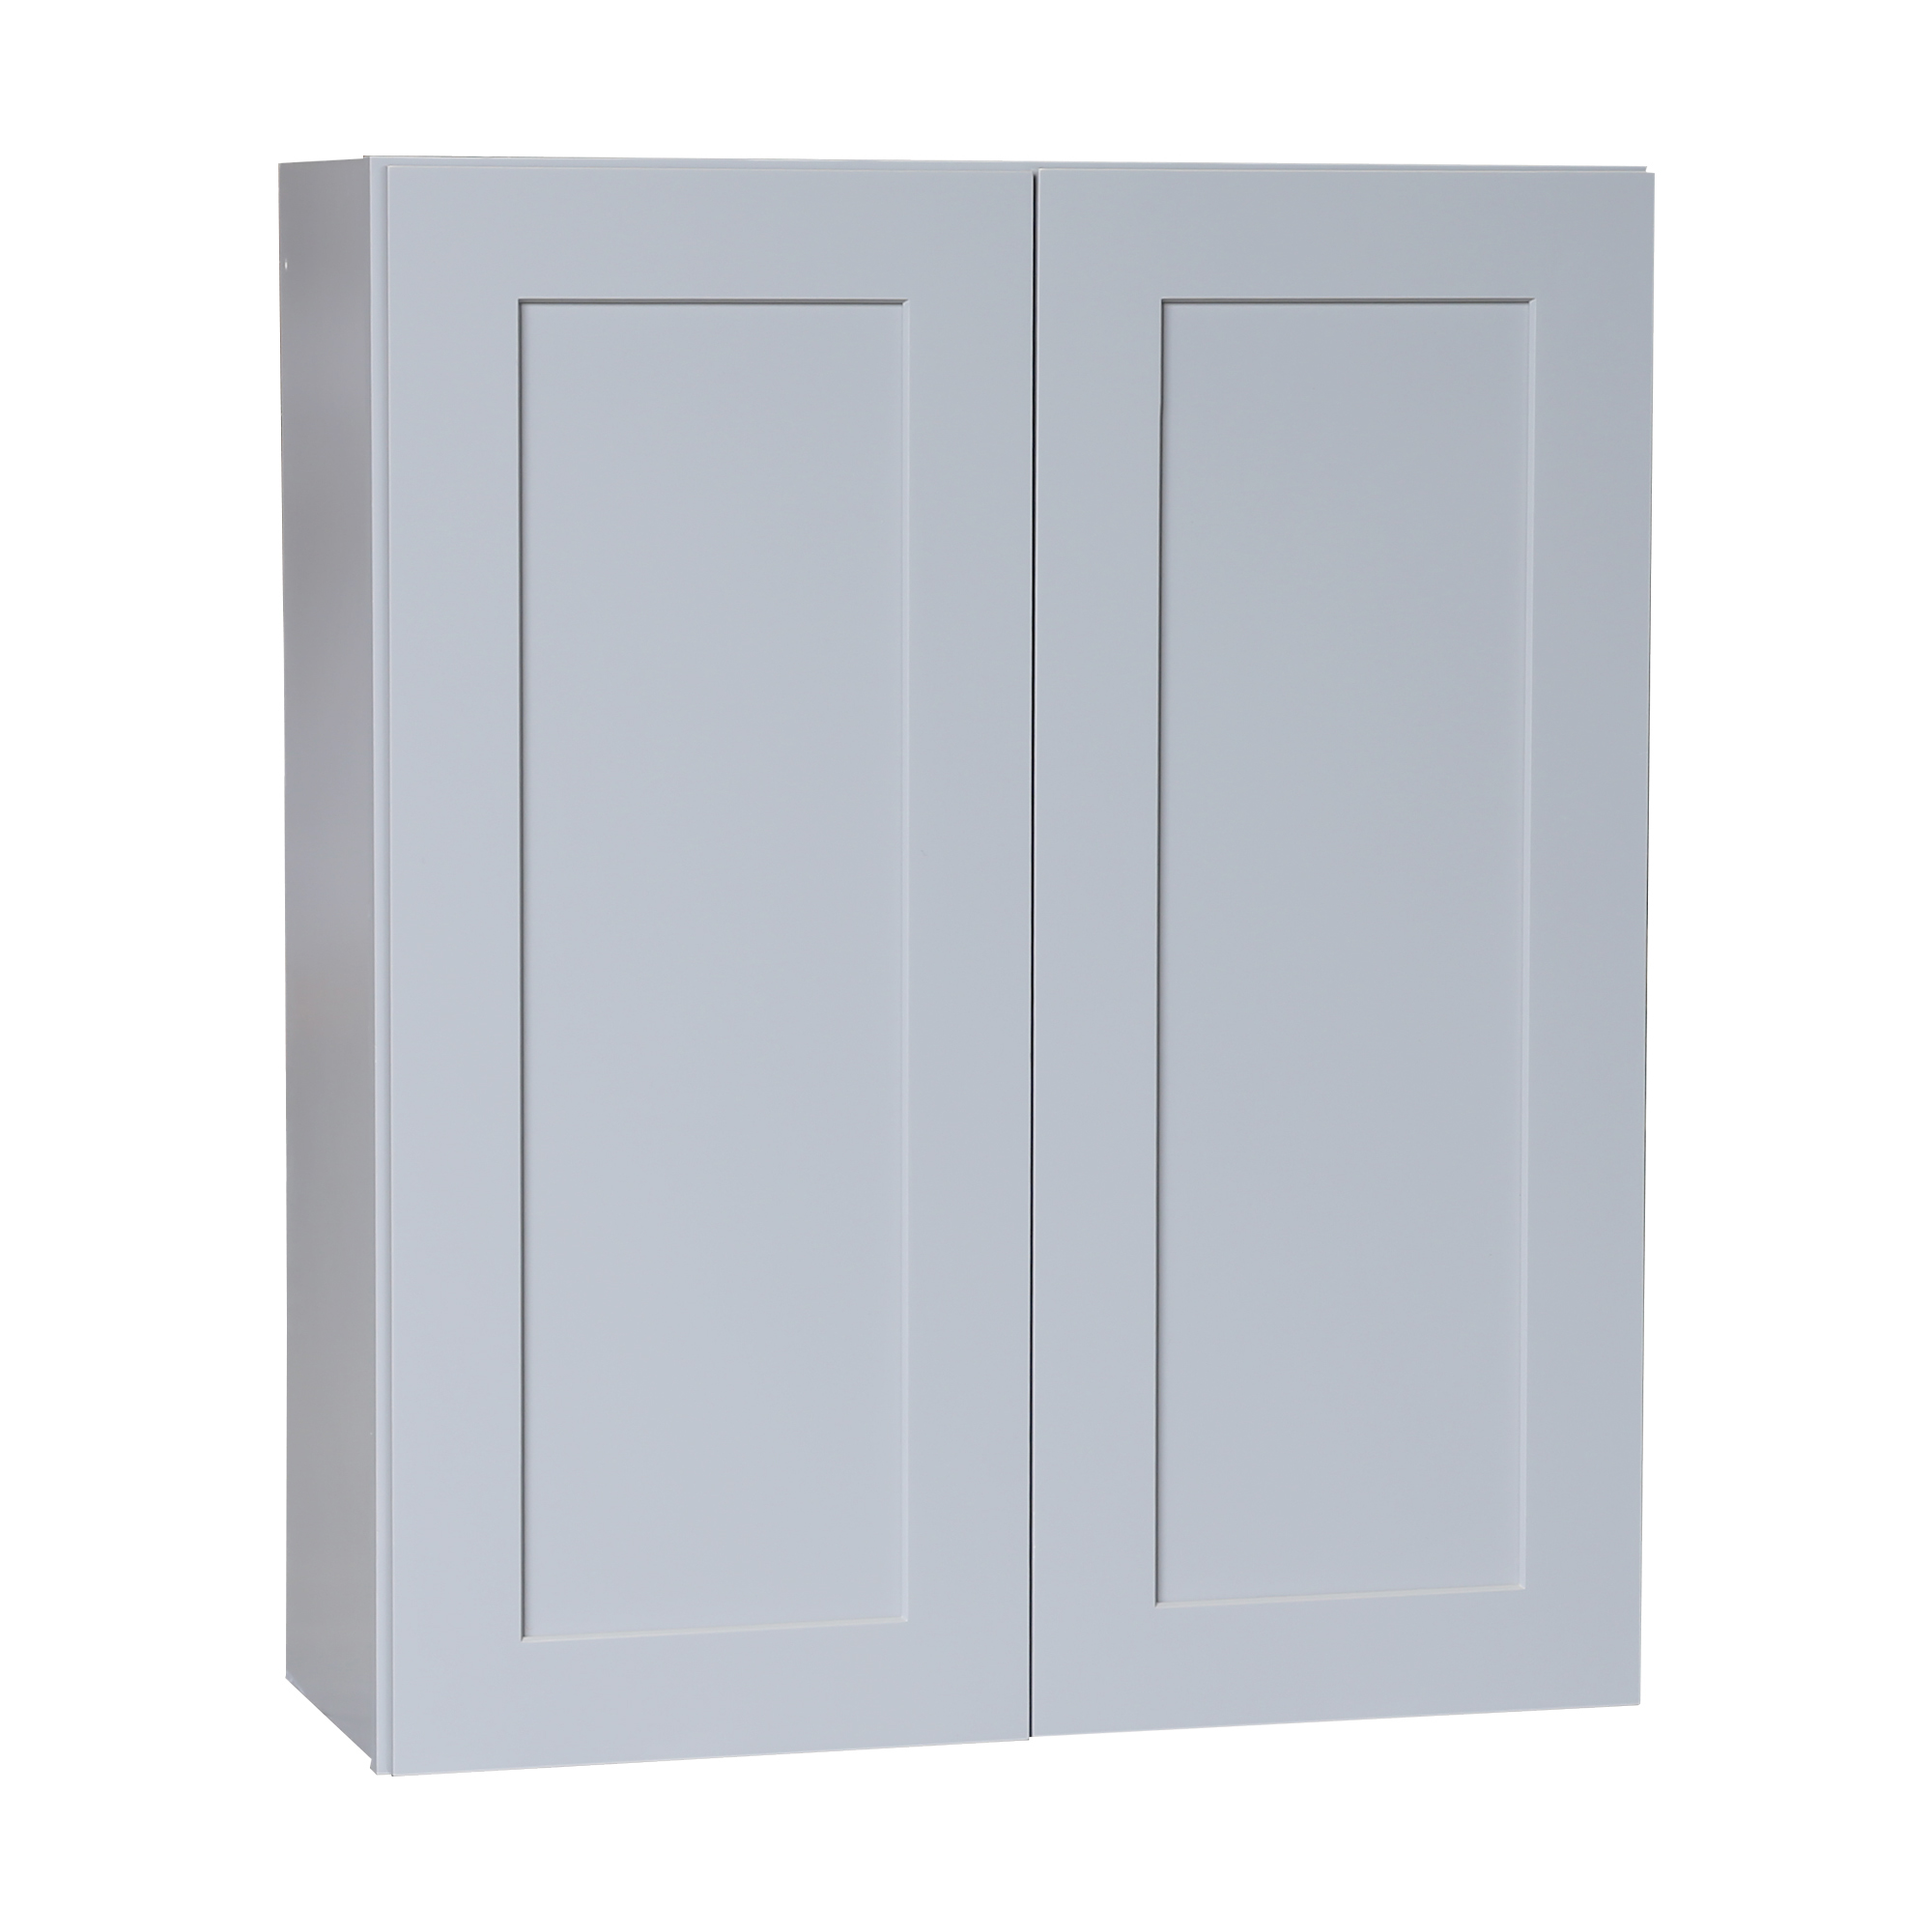 Ready to Assemble 24x21x12 in. Shaker High Double Door Wall Cabinet in Gray